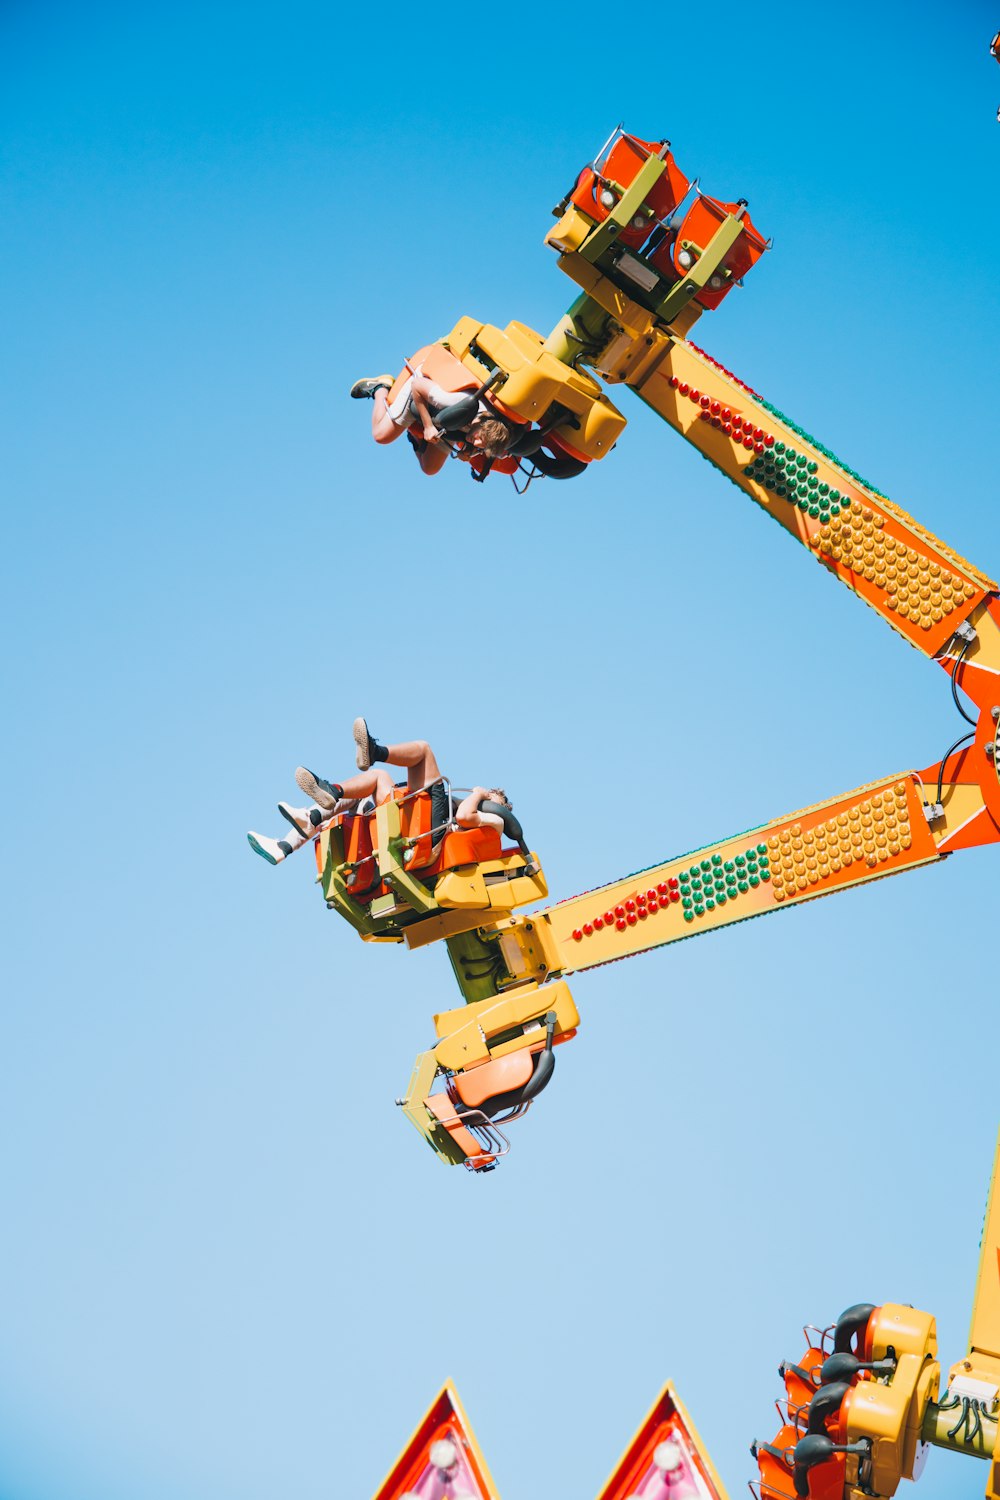 people riding on yellow and red roller coaster during daytime